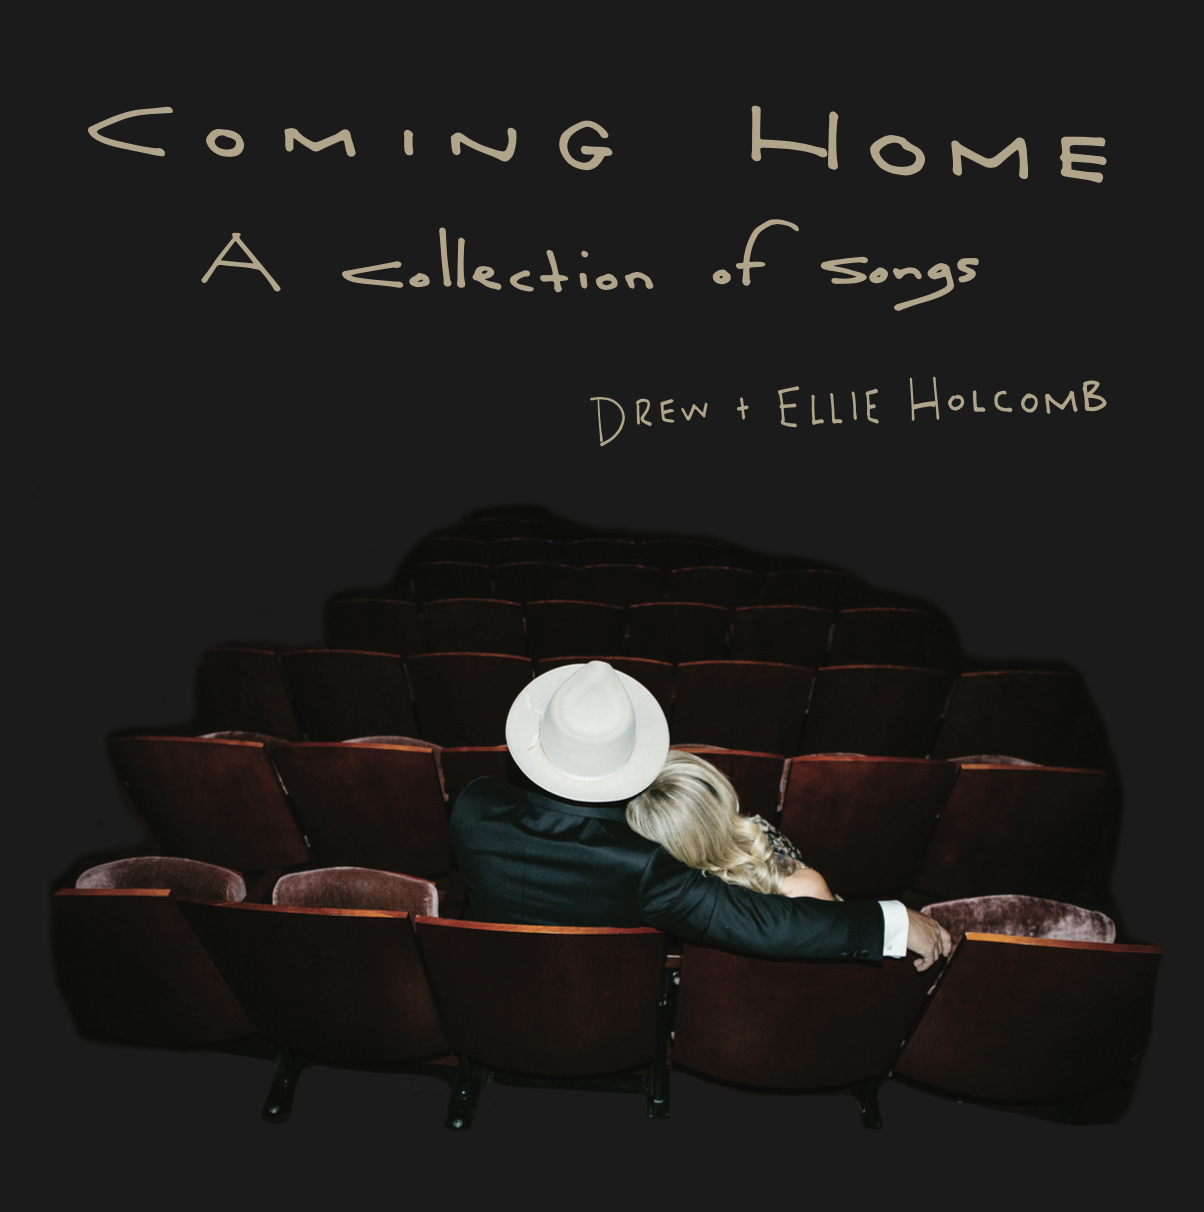 Drew &amp; Ellie Holcomb - Coming Home: A Collection of Songs - LP